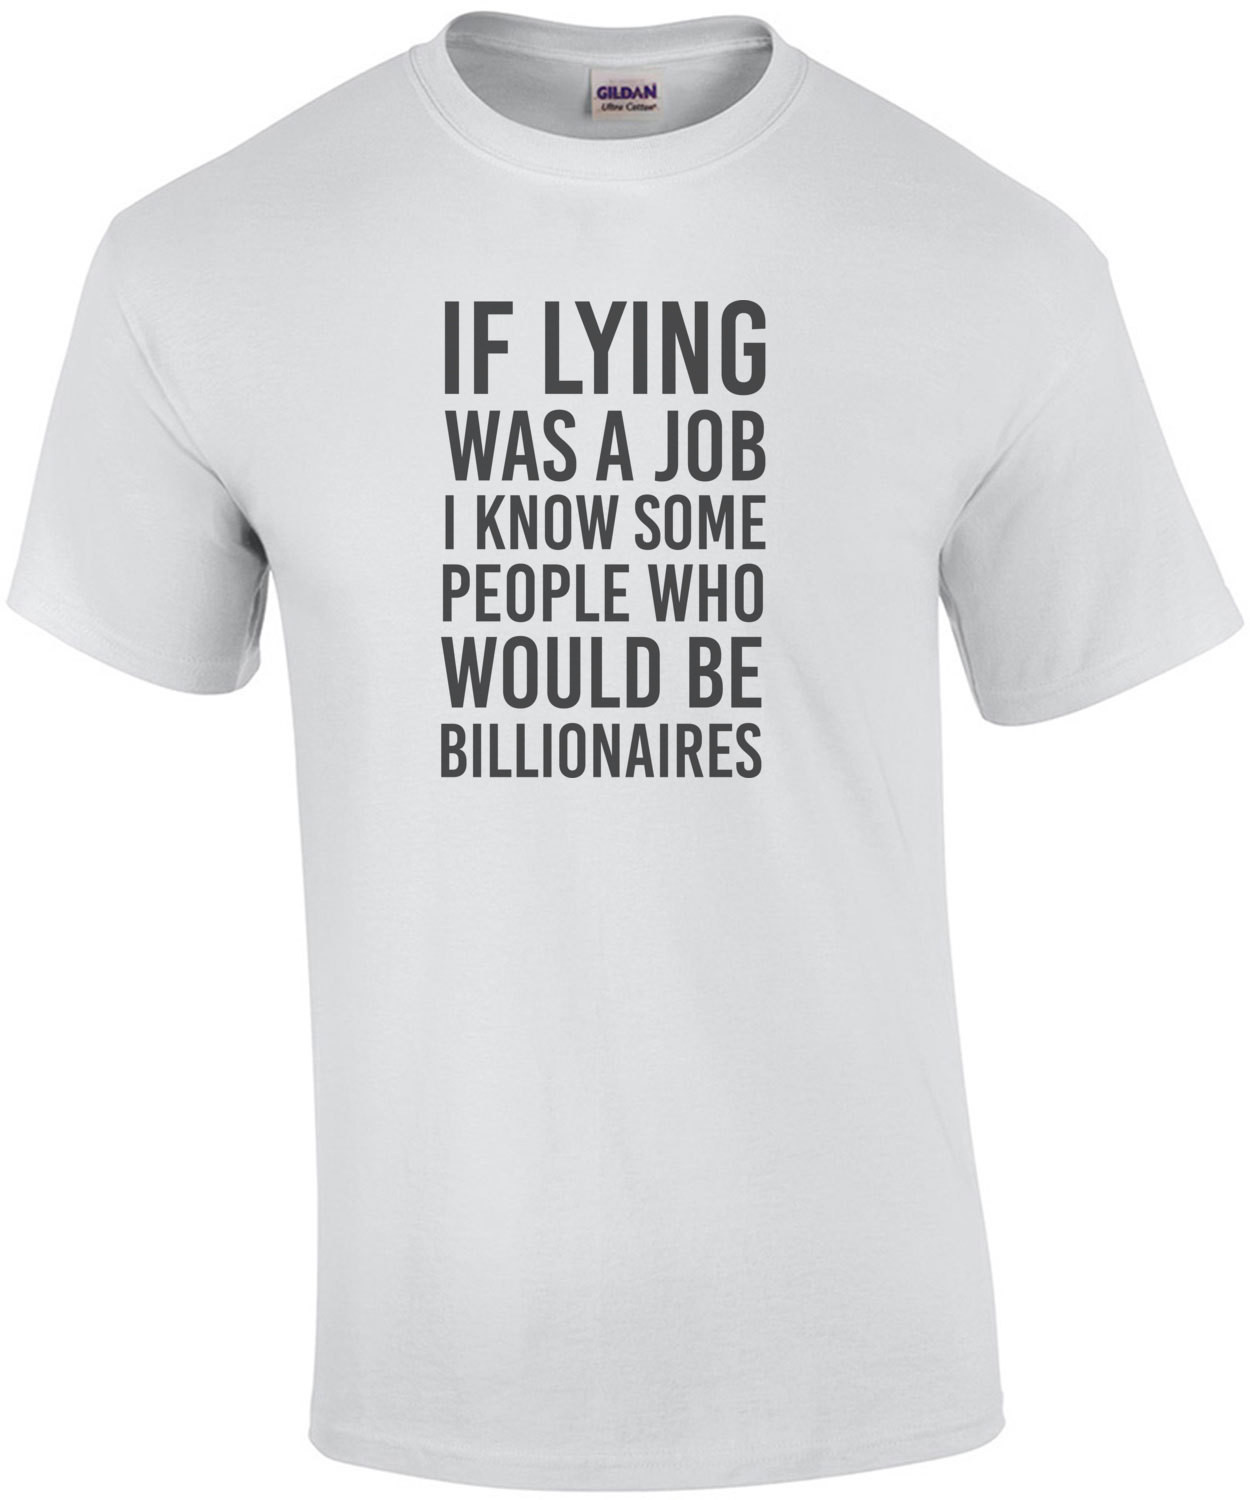 If lying was a job I know some people who would be billionaires - funny t-shirt